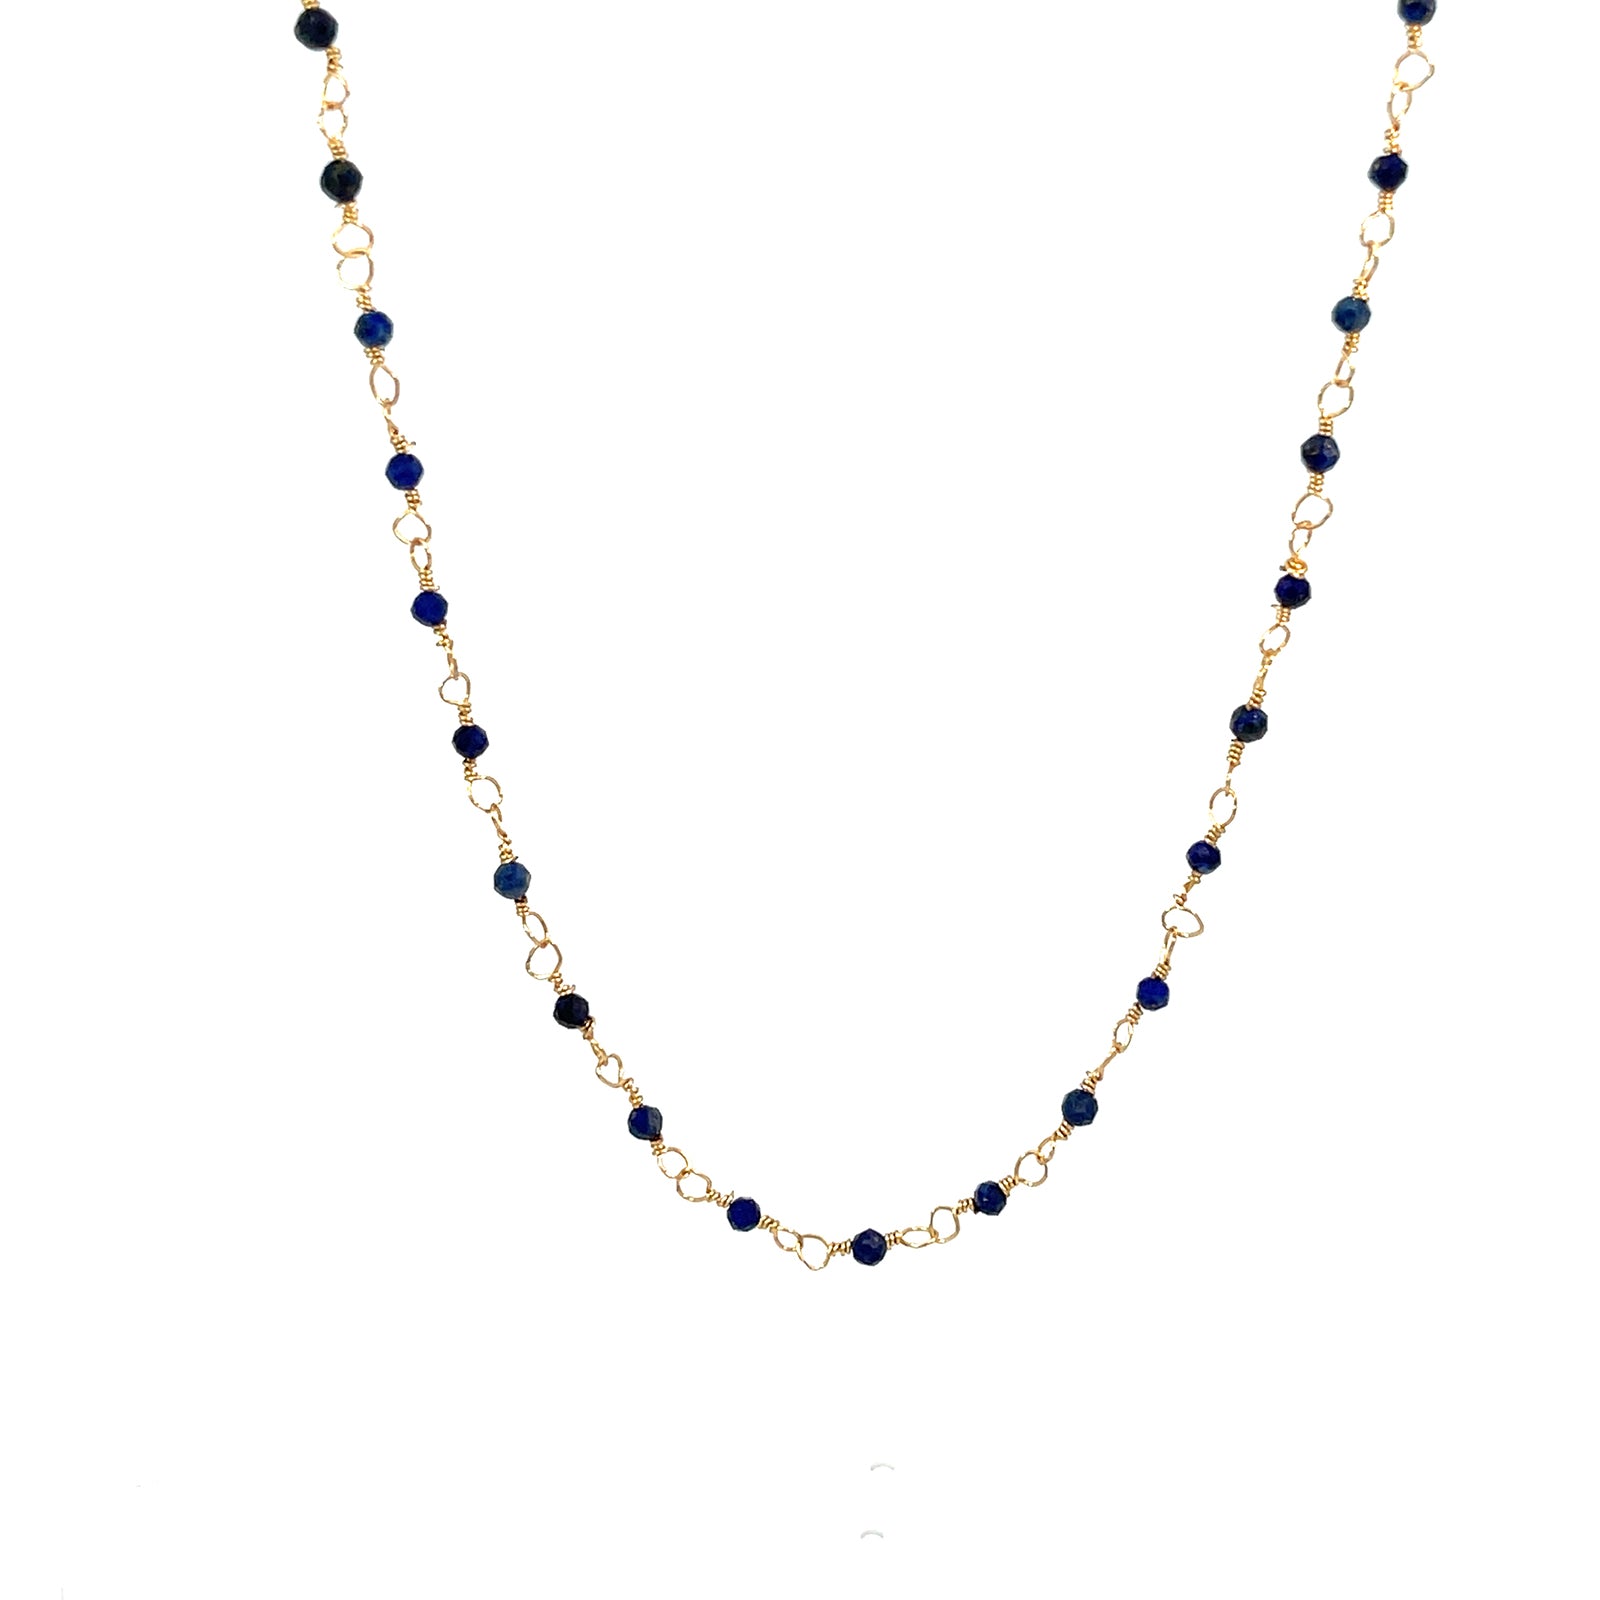 Explore Handcrafted Chiyo Beaded Necklaces